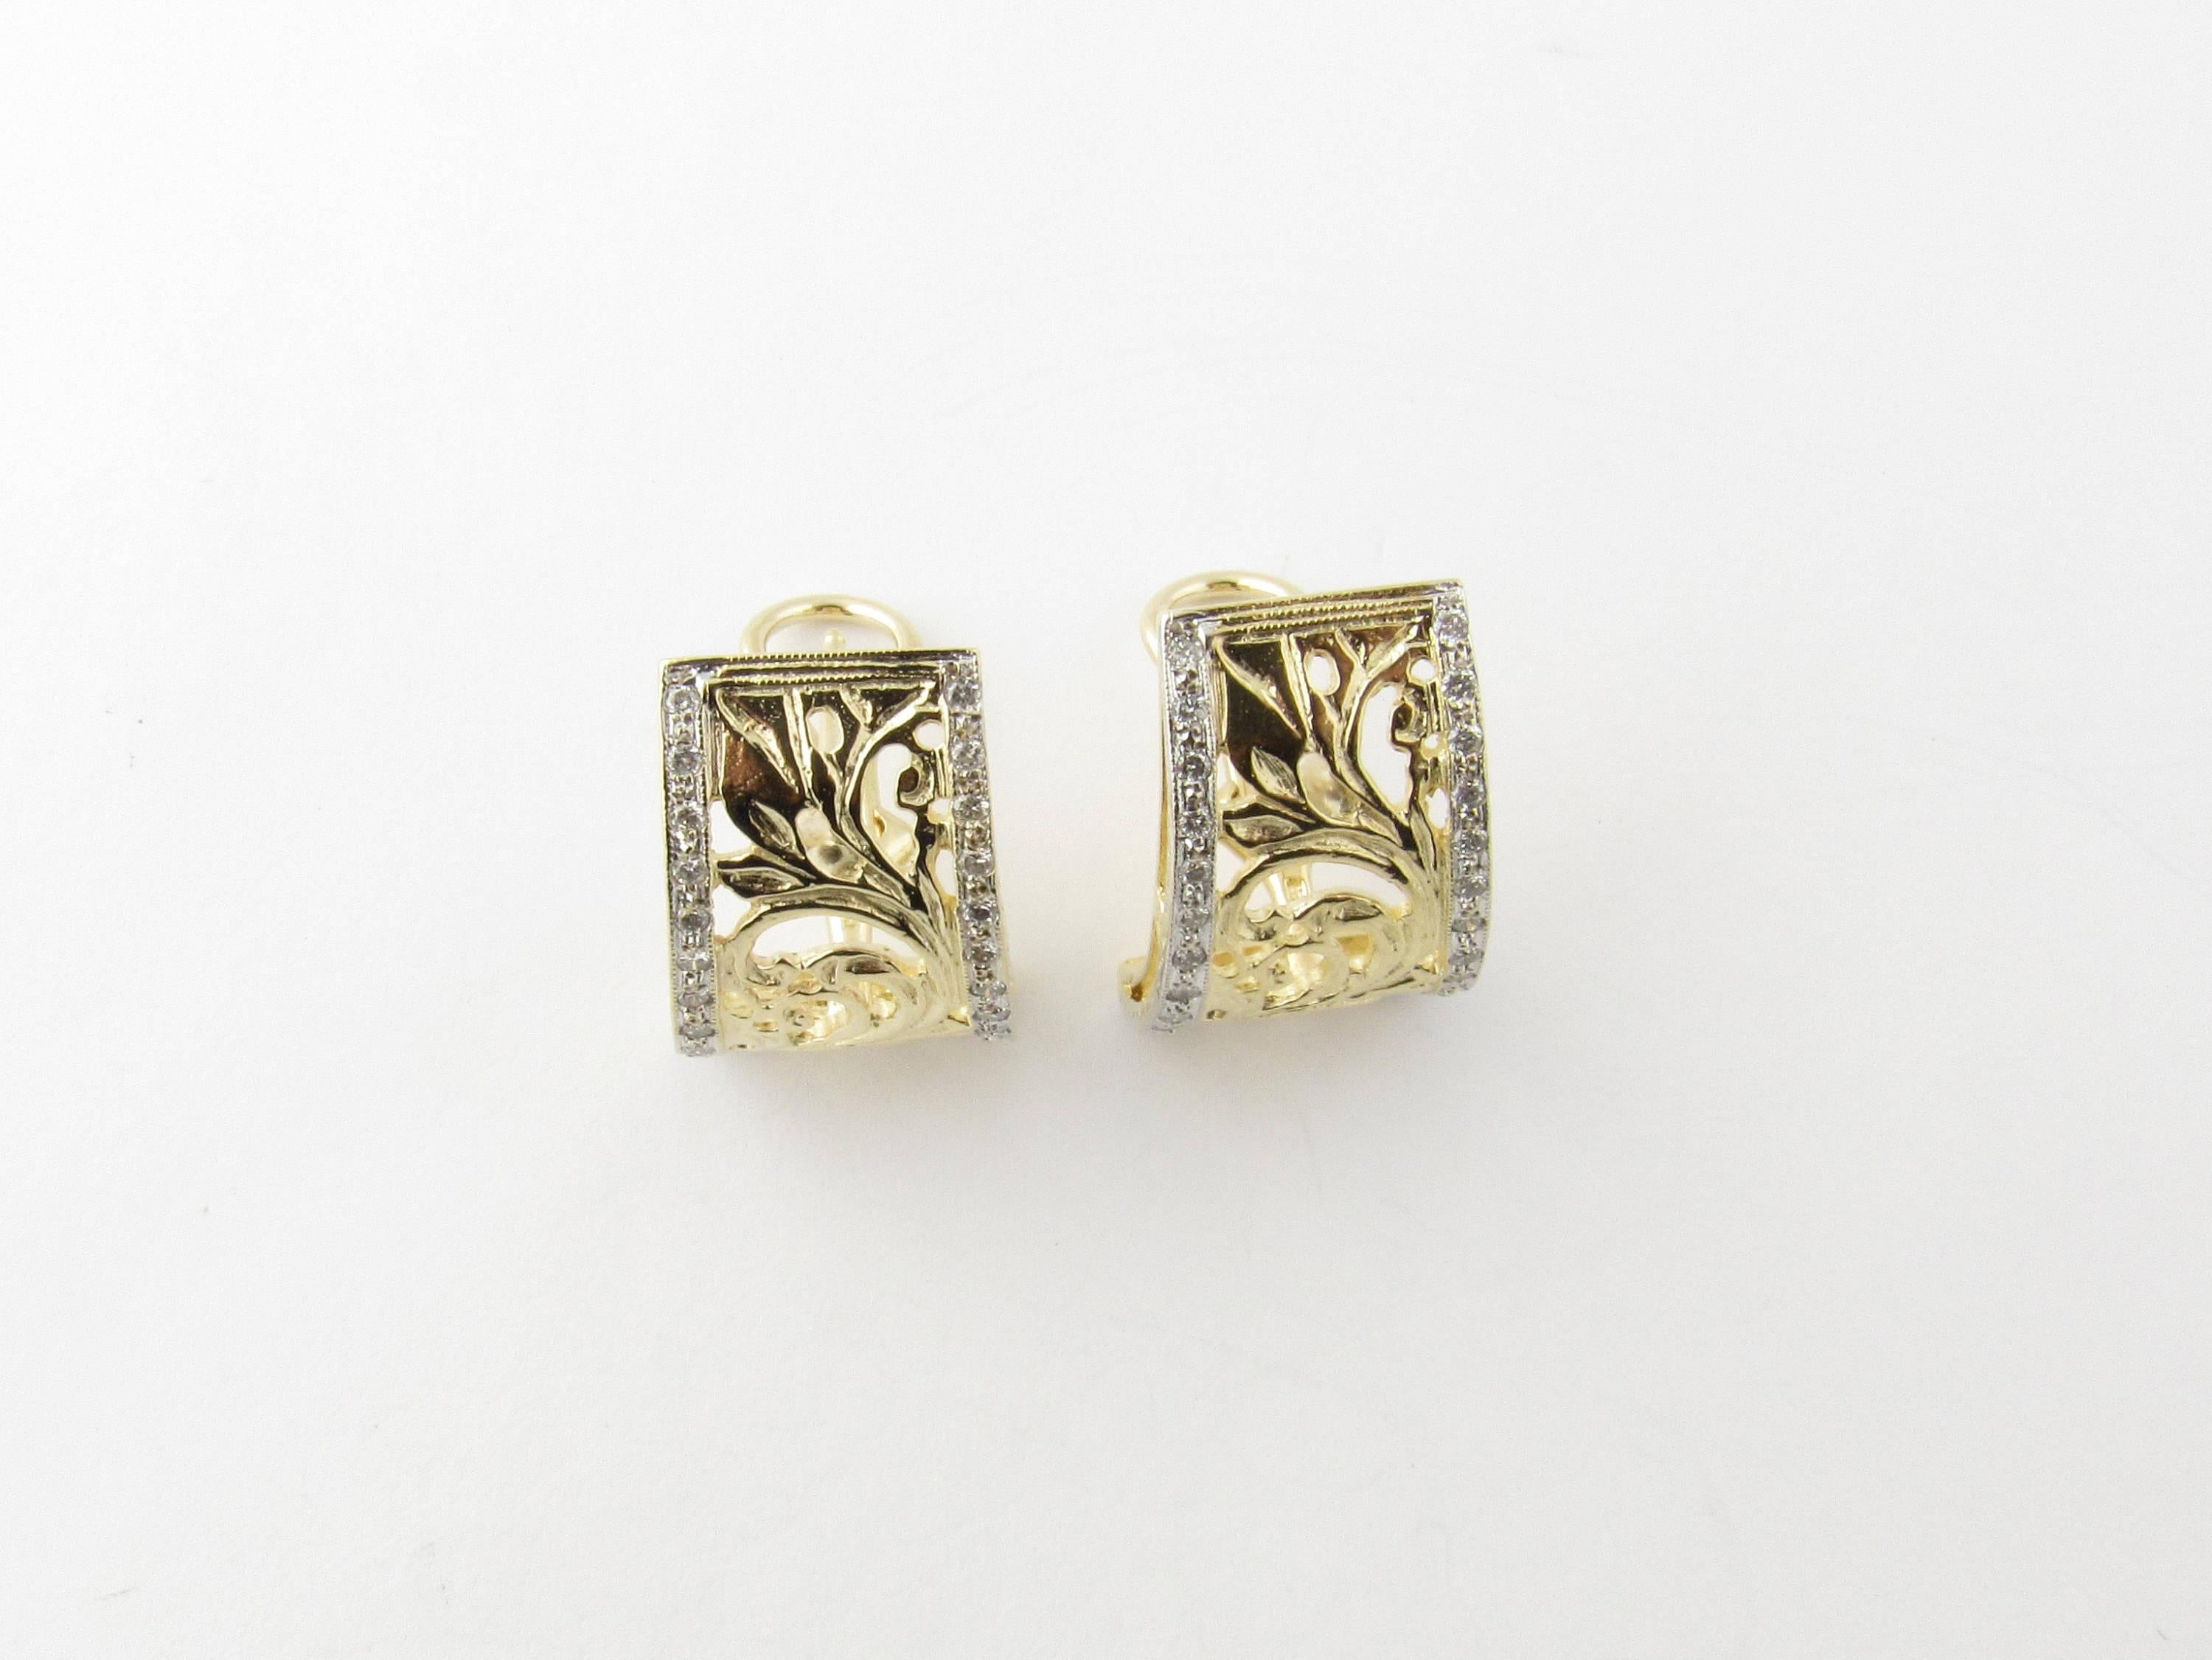 Vintage 14 Karat Yellow Gold and Diamond Earrings-

These magnificent earrings each feature 26 round brilliant cut diamonds set in an ornate 14K yellow gold open design. Hinge back closures.

Approximate total diamond weight: .52 ct.

Diamond color: